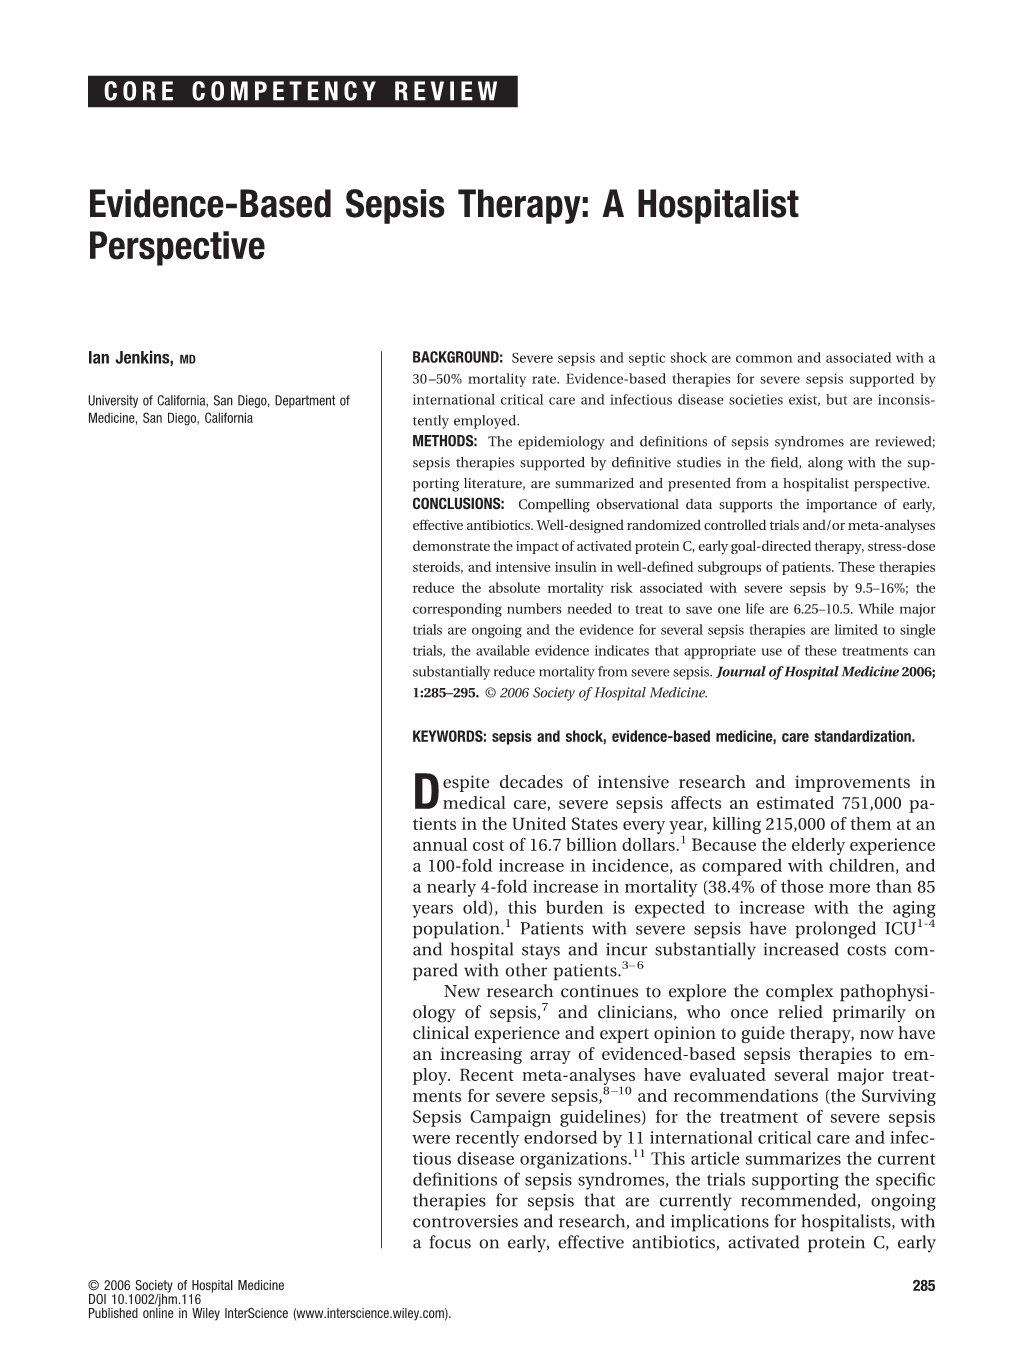 Evidence-Based Sepsis Therapy: a Hospitalist Perspective